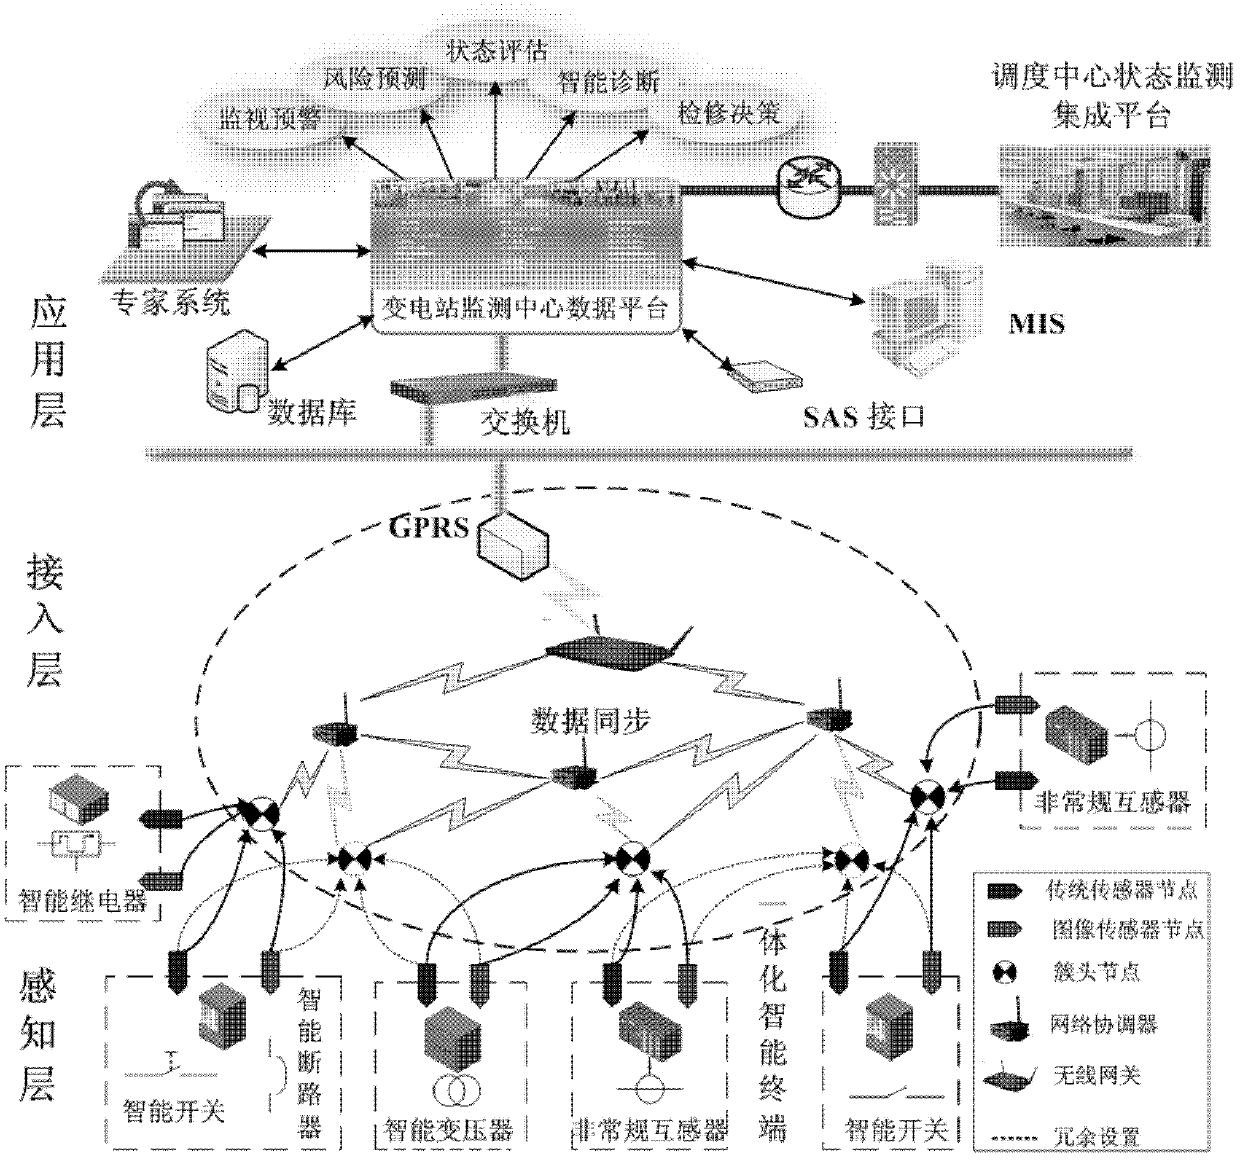 Wireless intelligent sensor network system for monitoring states of intelligent substation devices